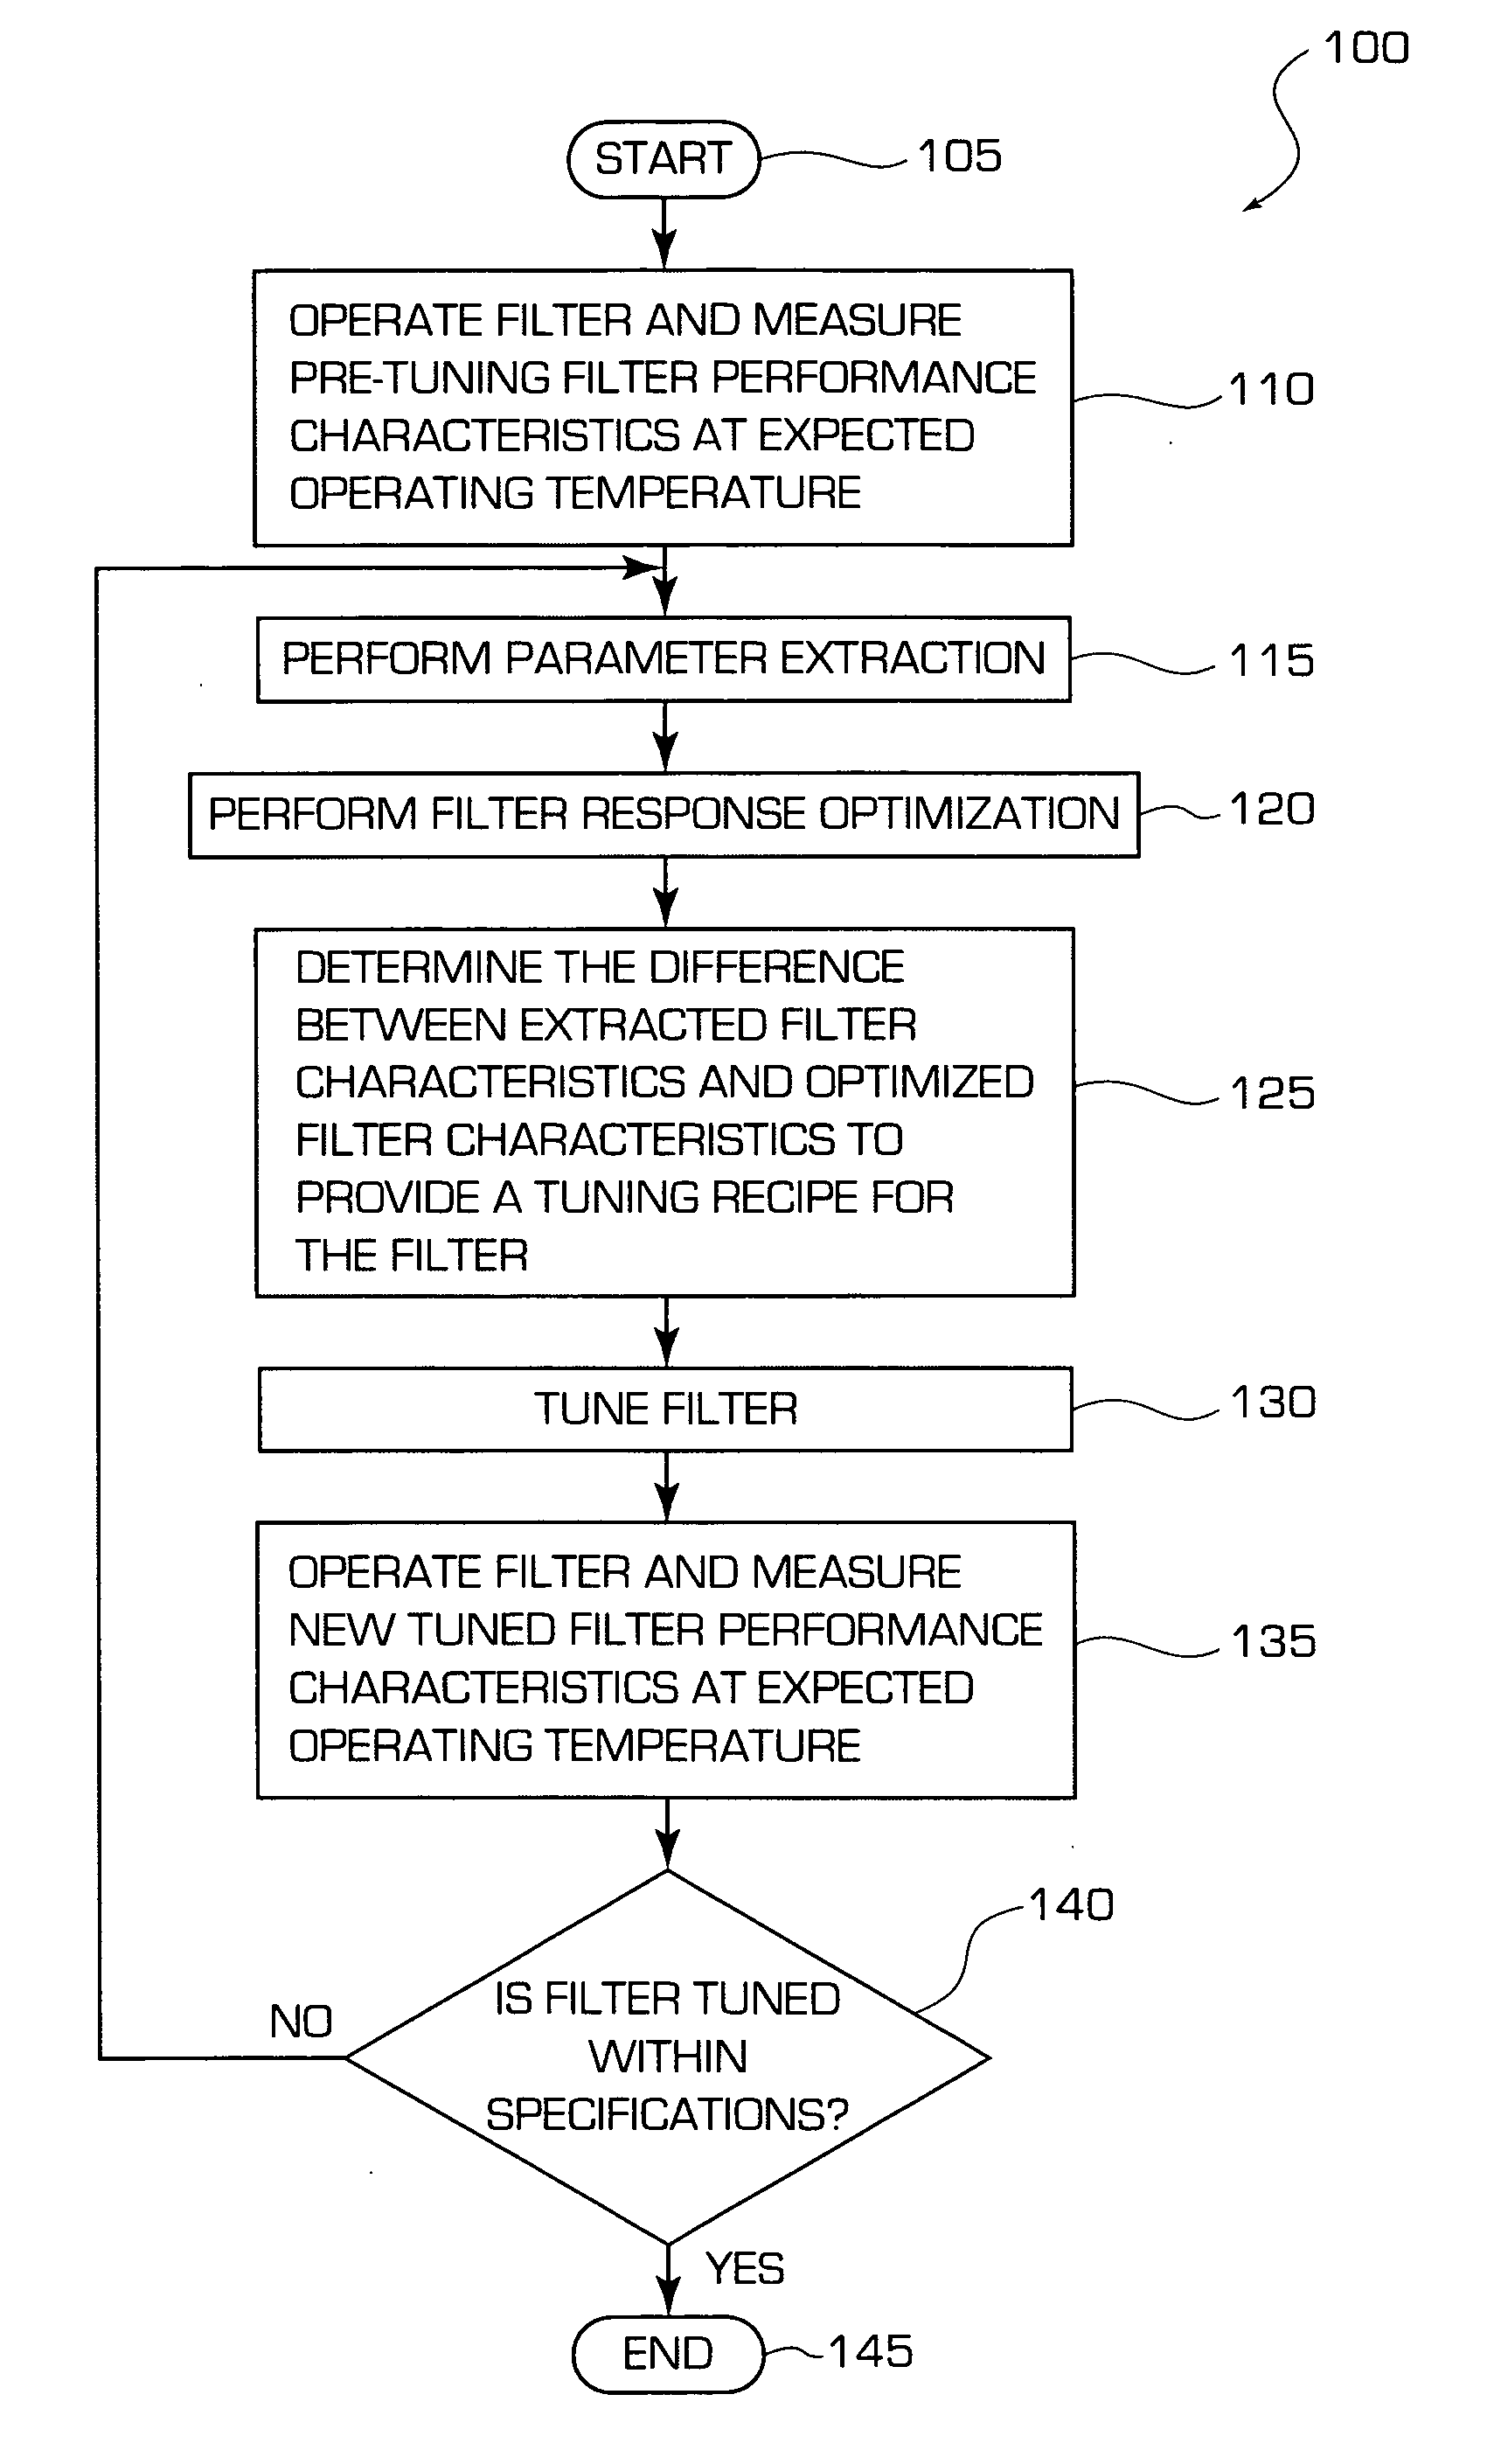 Systems and methods for tuning filters